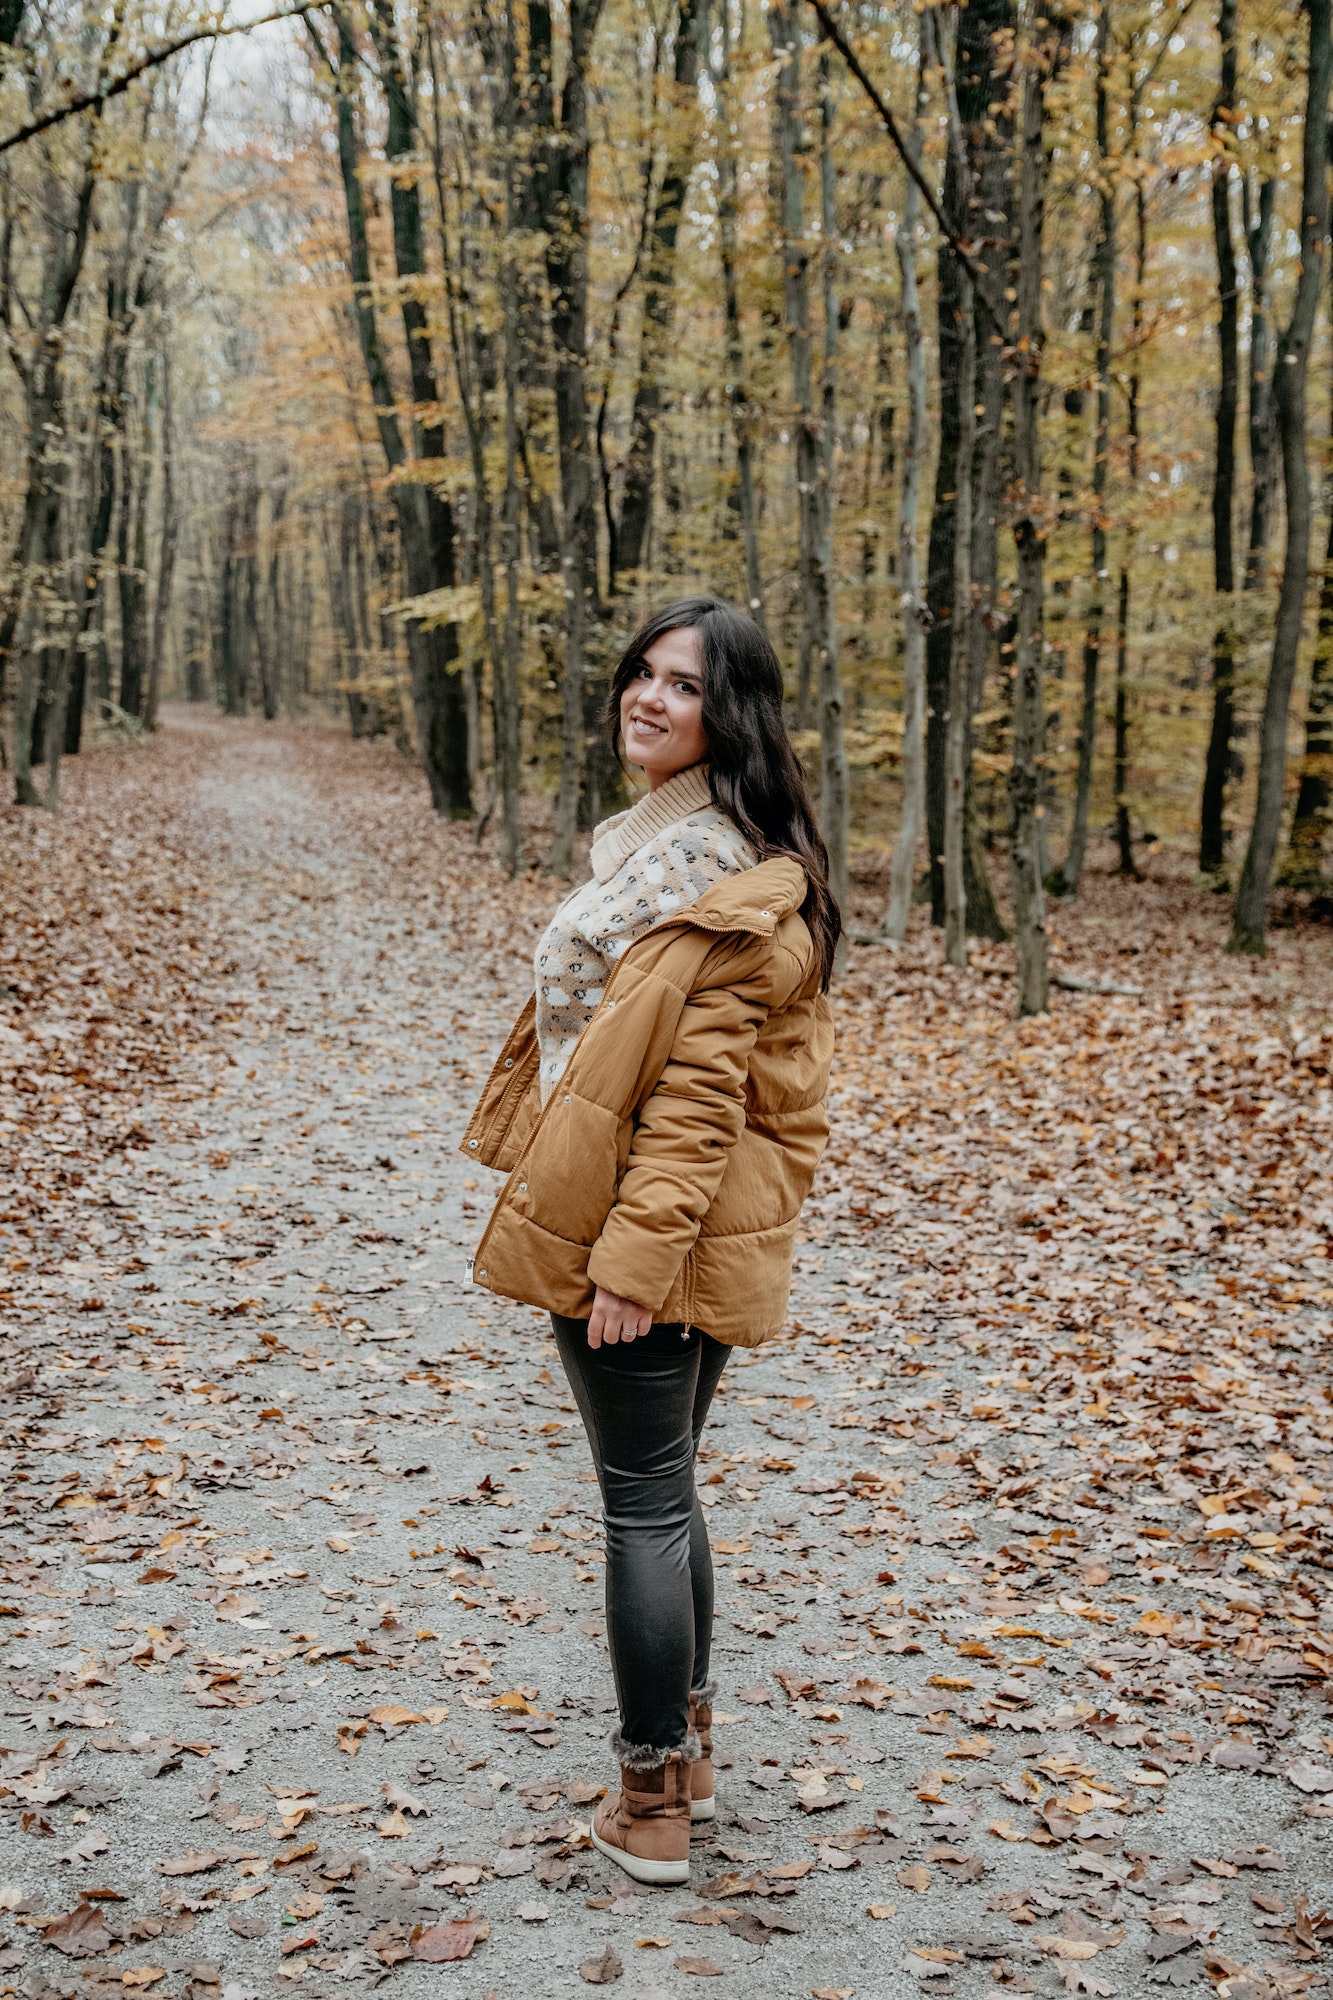 Shot of a beautiful smiling woman posing in an autumn forest